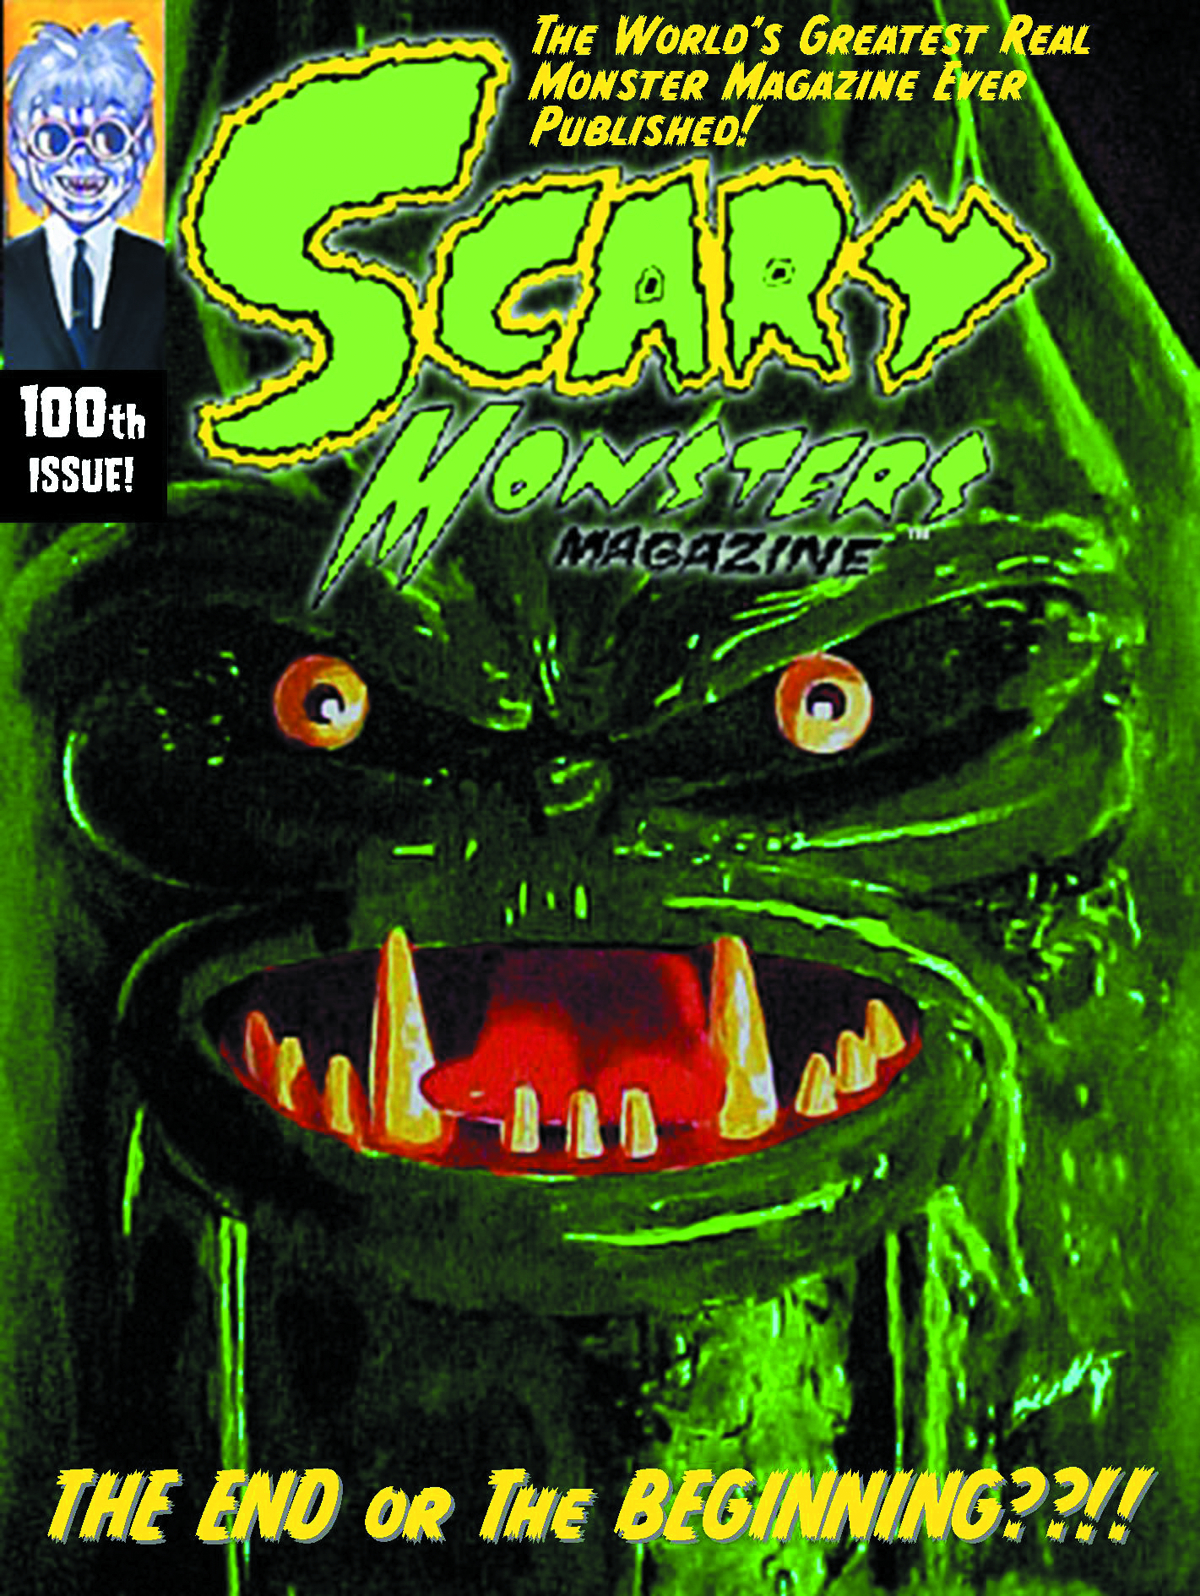 SCARY MONSTERS MAGAZINE #100